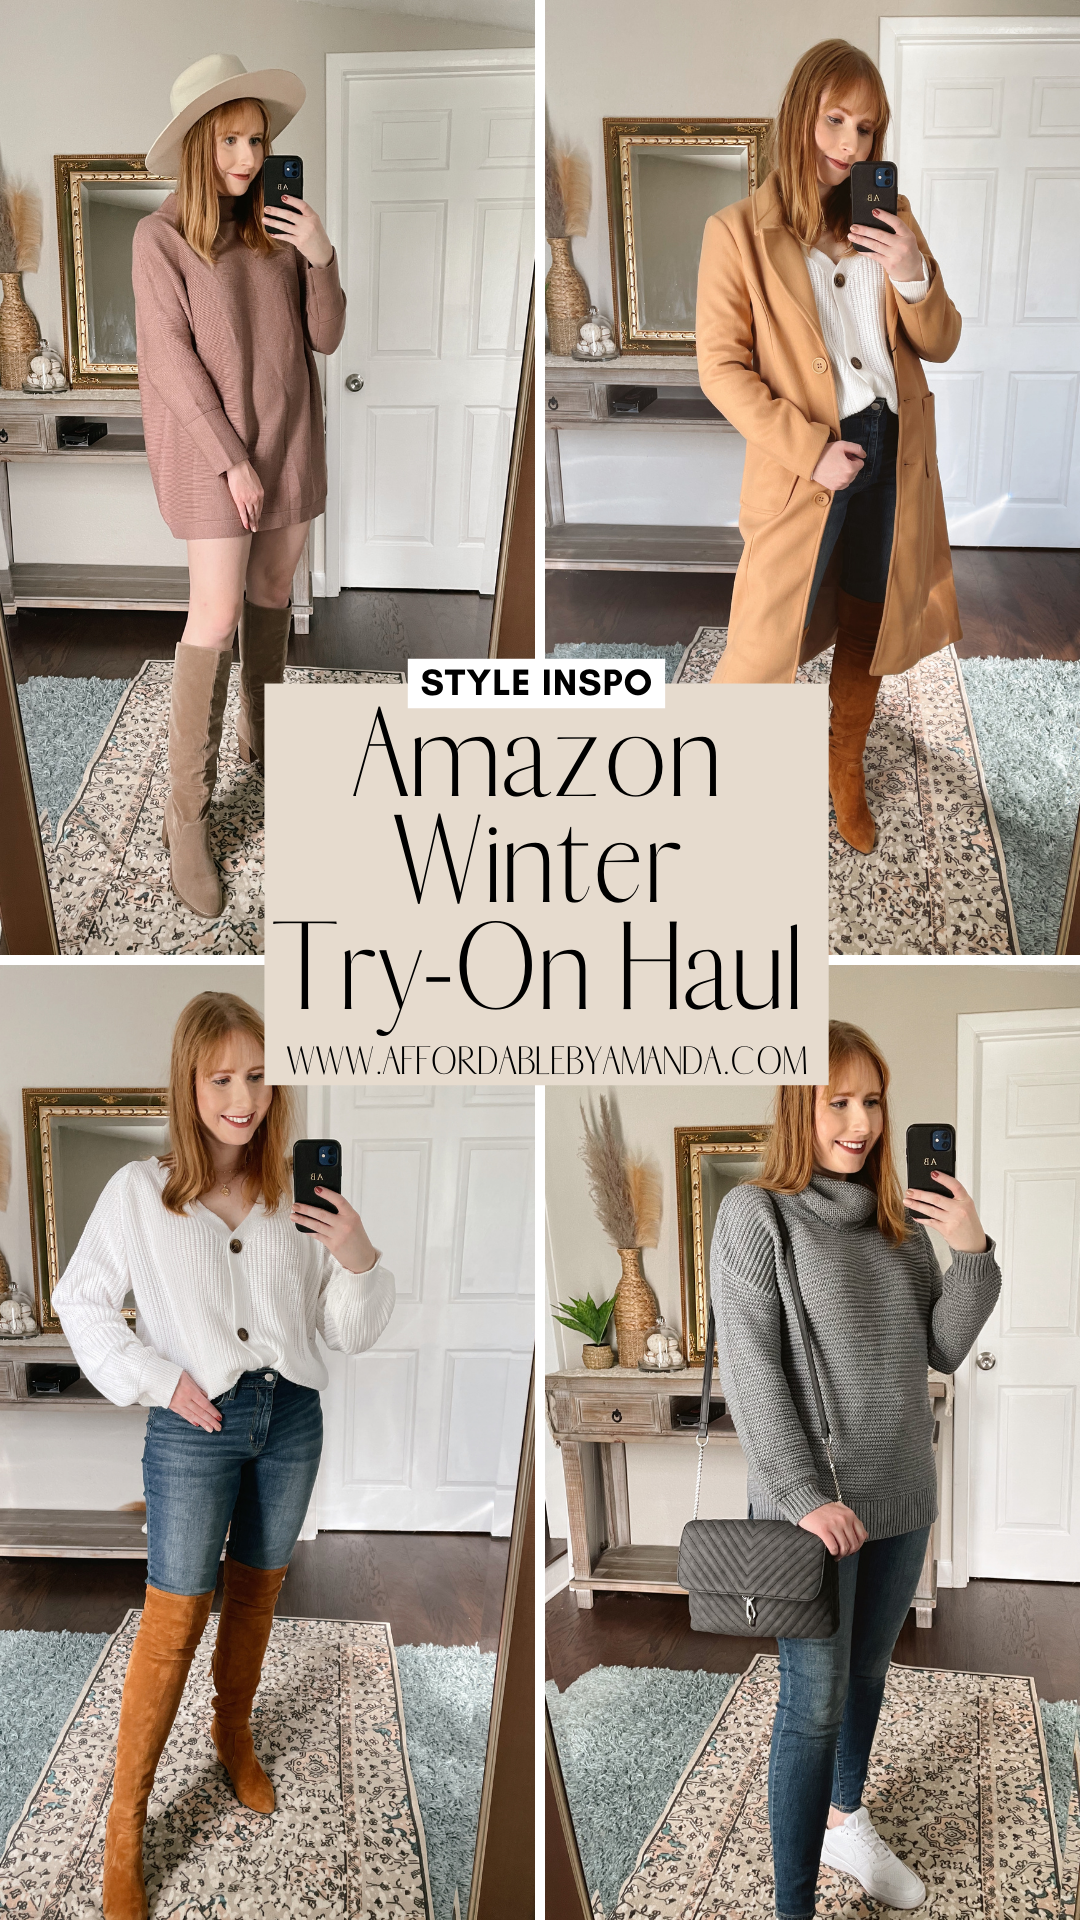 Affordable Amazon Winter Fashion Finds Under $50 | Affordable by Amanda